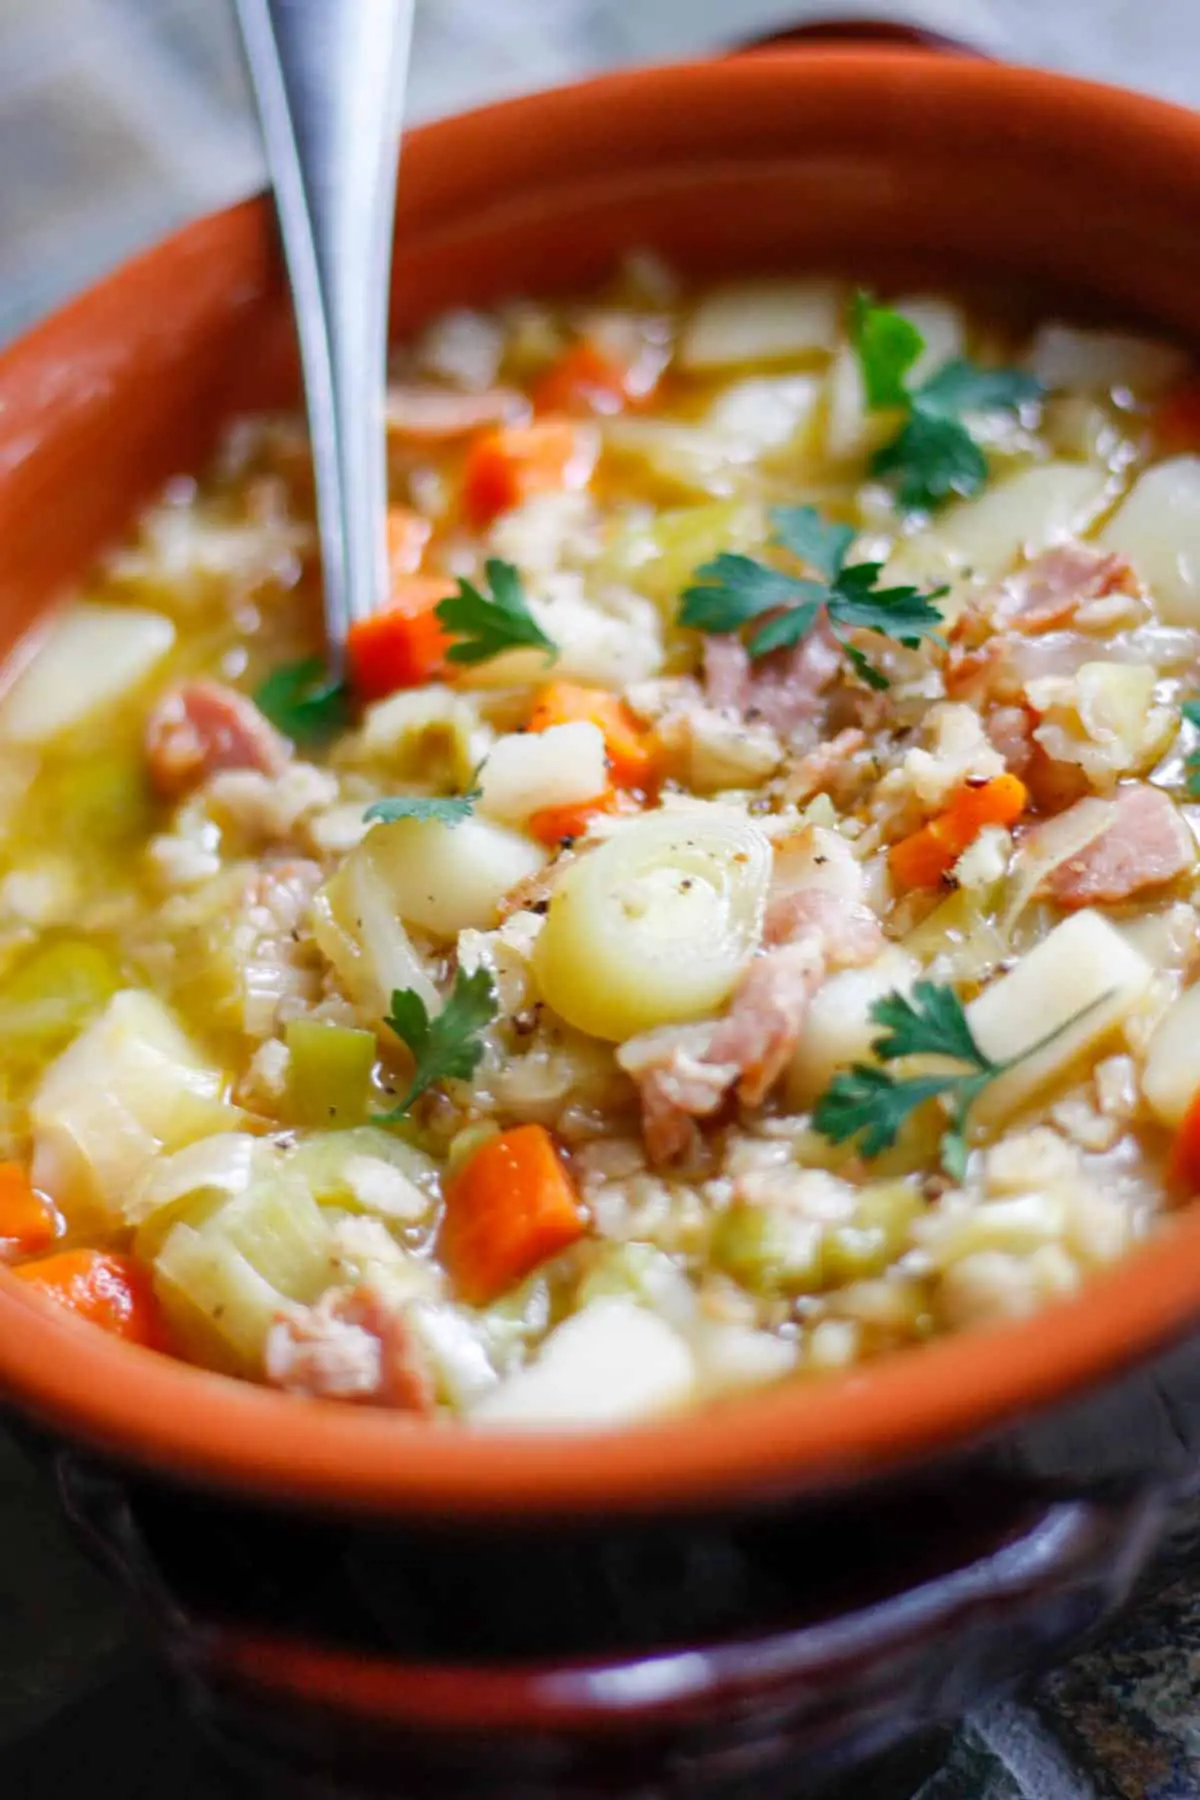 A terracotta soup bowl full of soup consisting of chicken broth, bacon, leeks, carrots, cabbage and potatoes garnished with Italian parsley with a spoon resting in the soup.